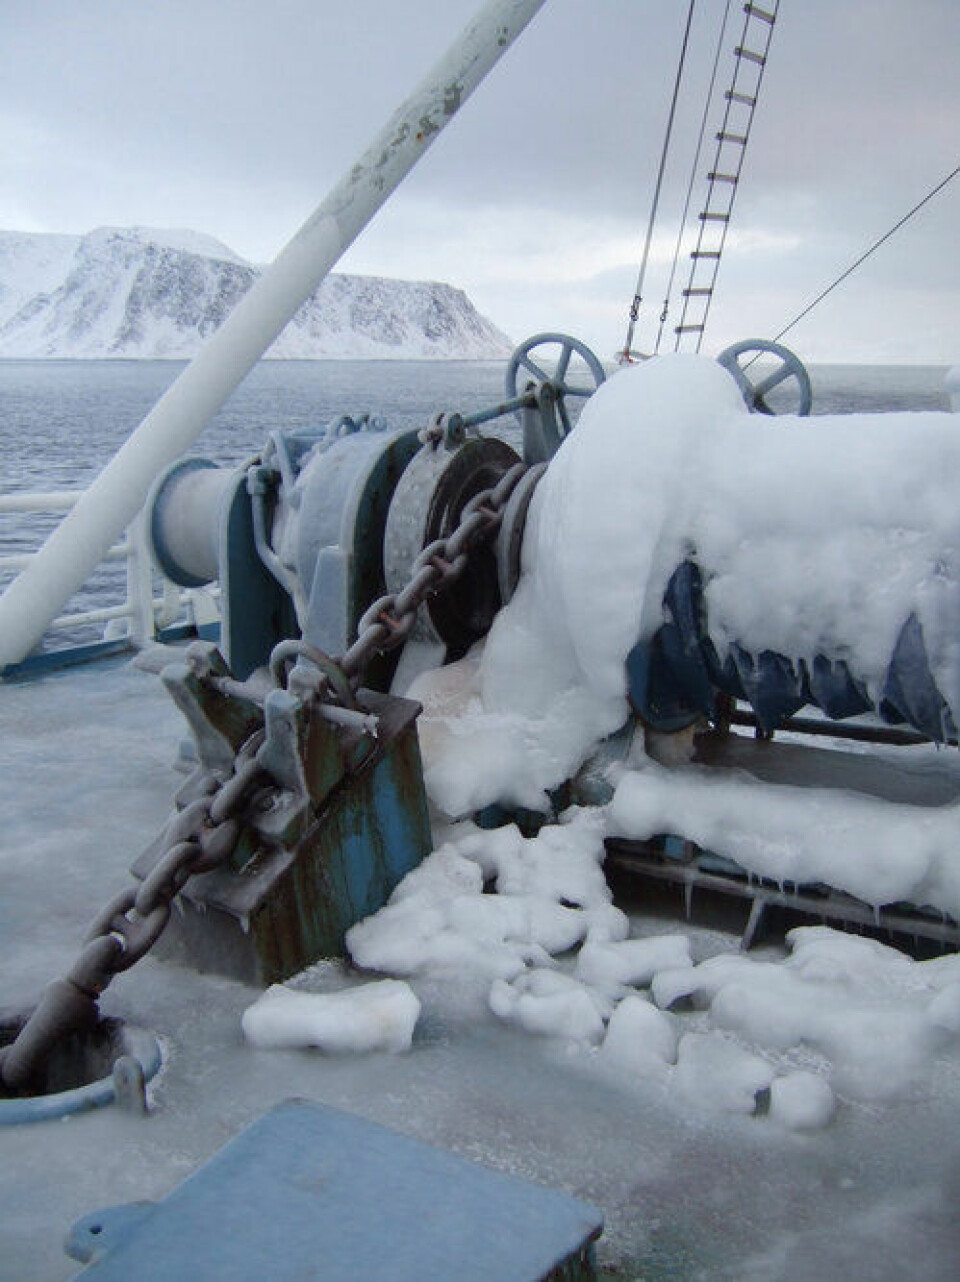 Icing on research vessel Lance. So called maritime icing can add tremendous weight to a ship and cause it to sink. (Photo: Eli Anne Ersdal)